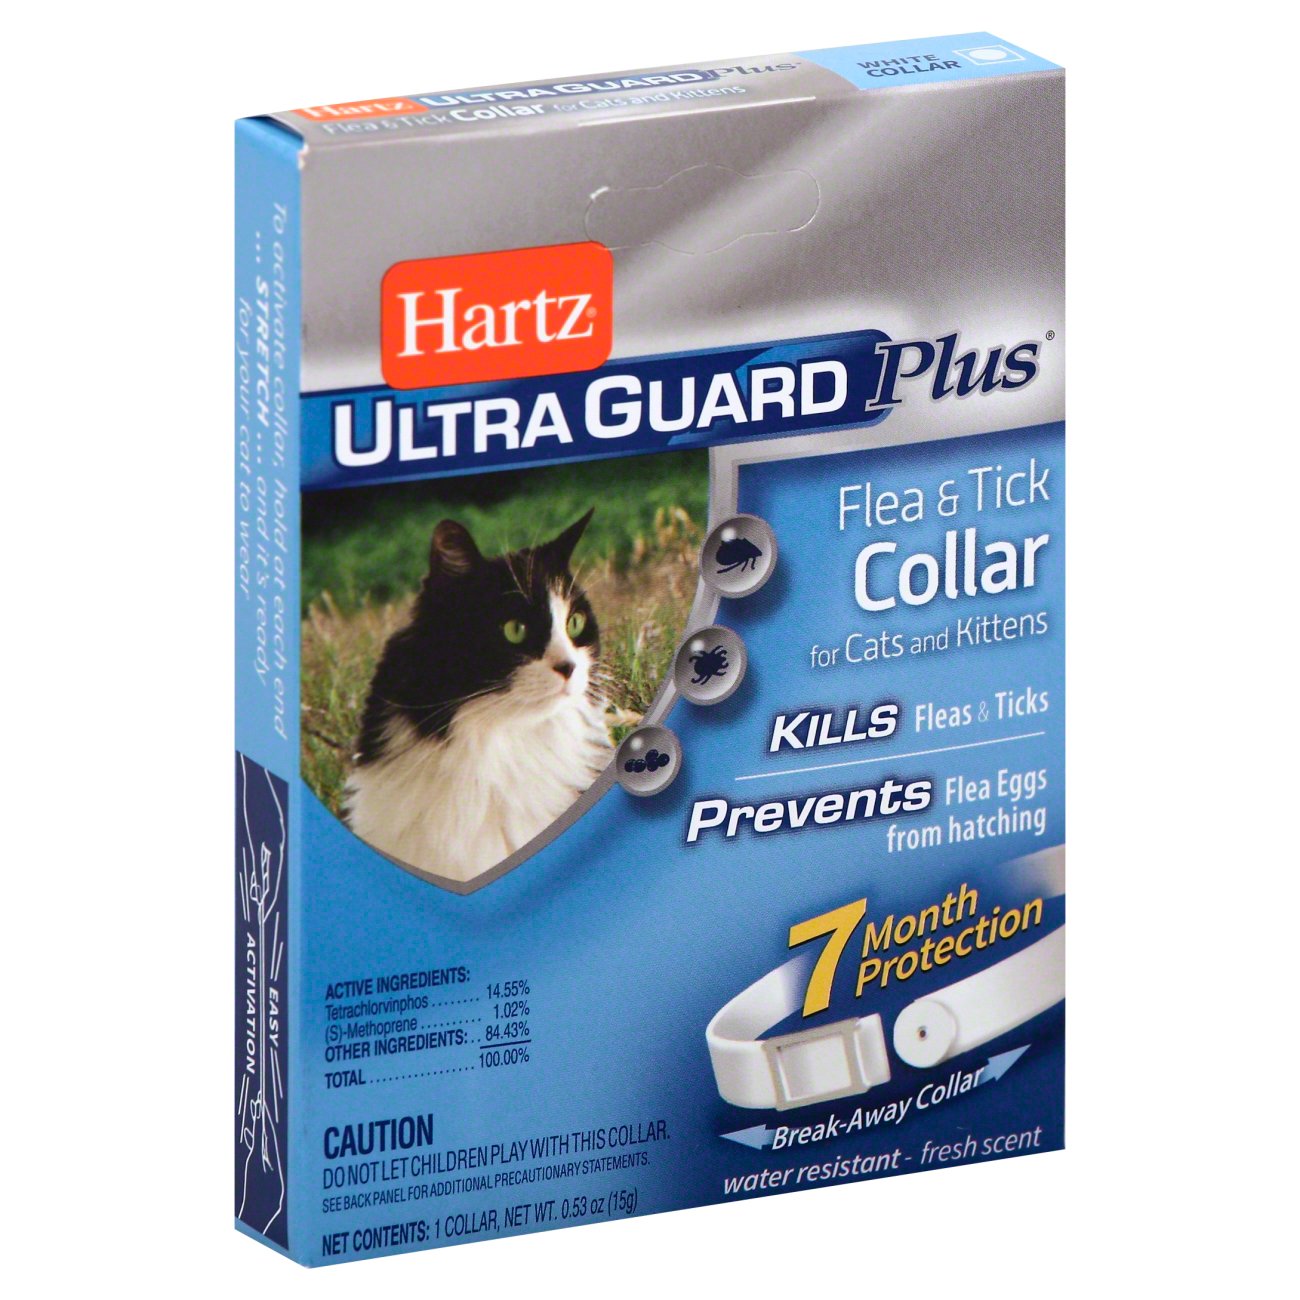 Hartz Ultra Guard Plus Flea and Tick Collar For Cats and Kittens Clean